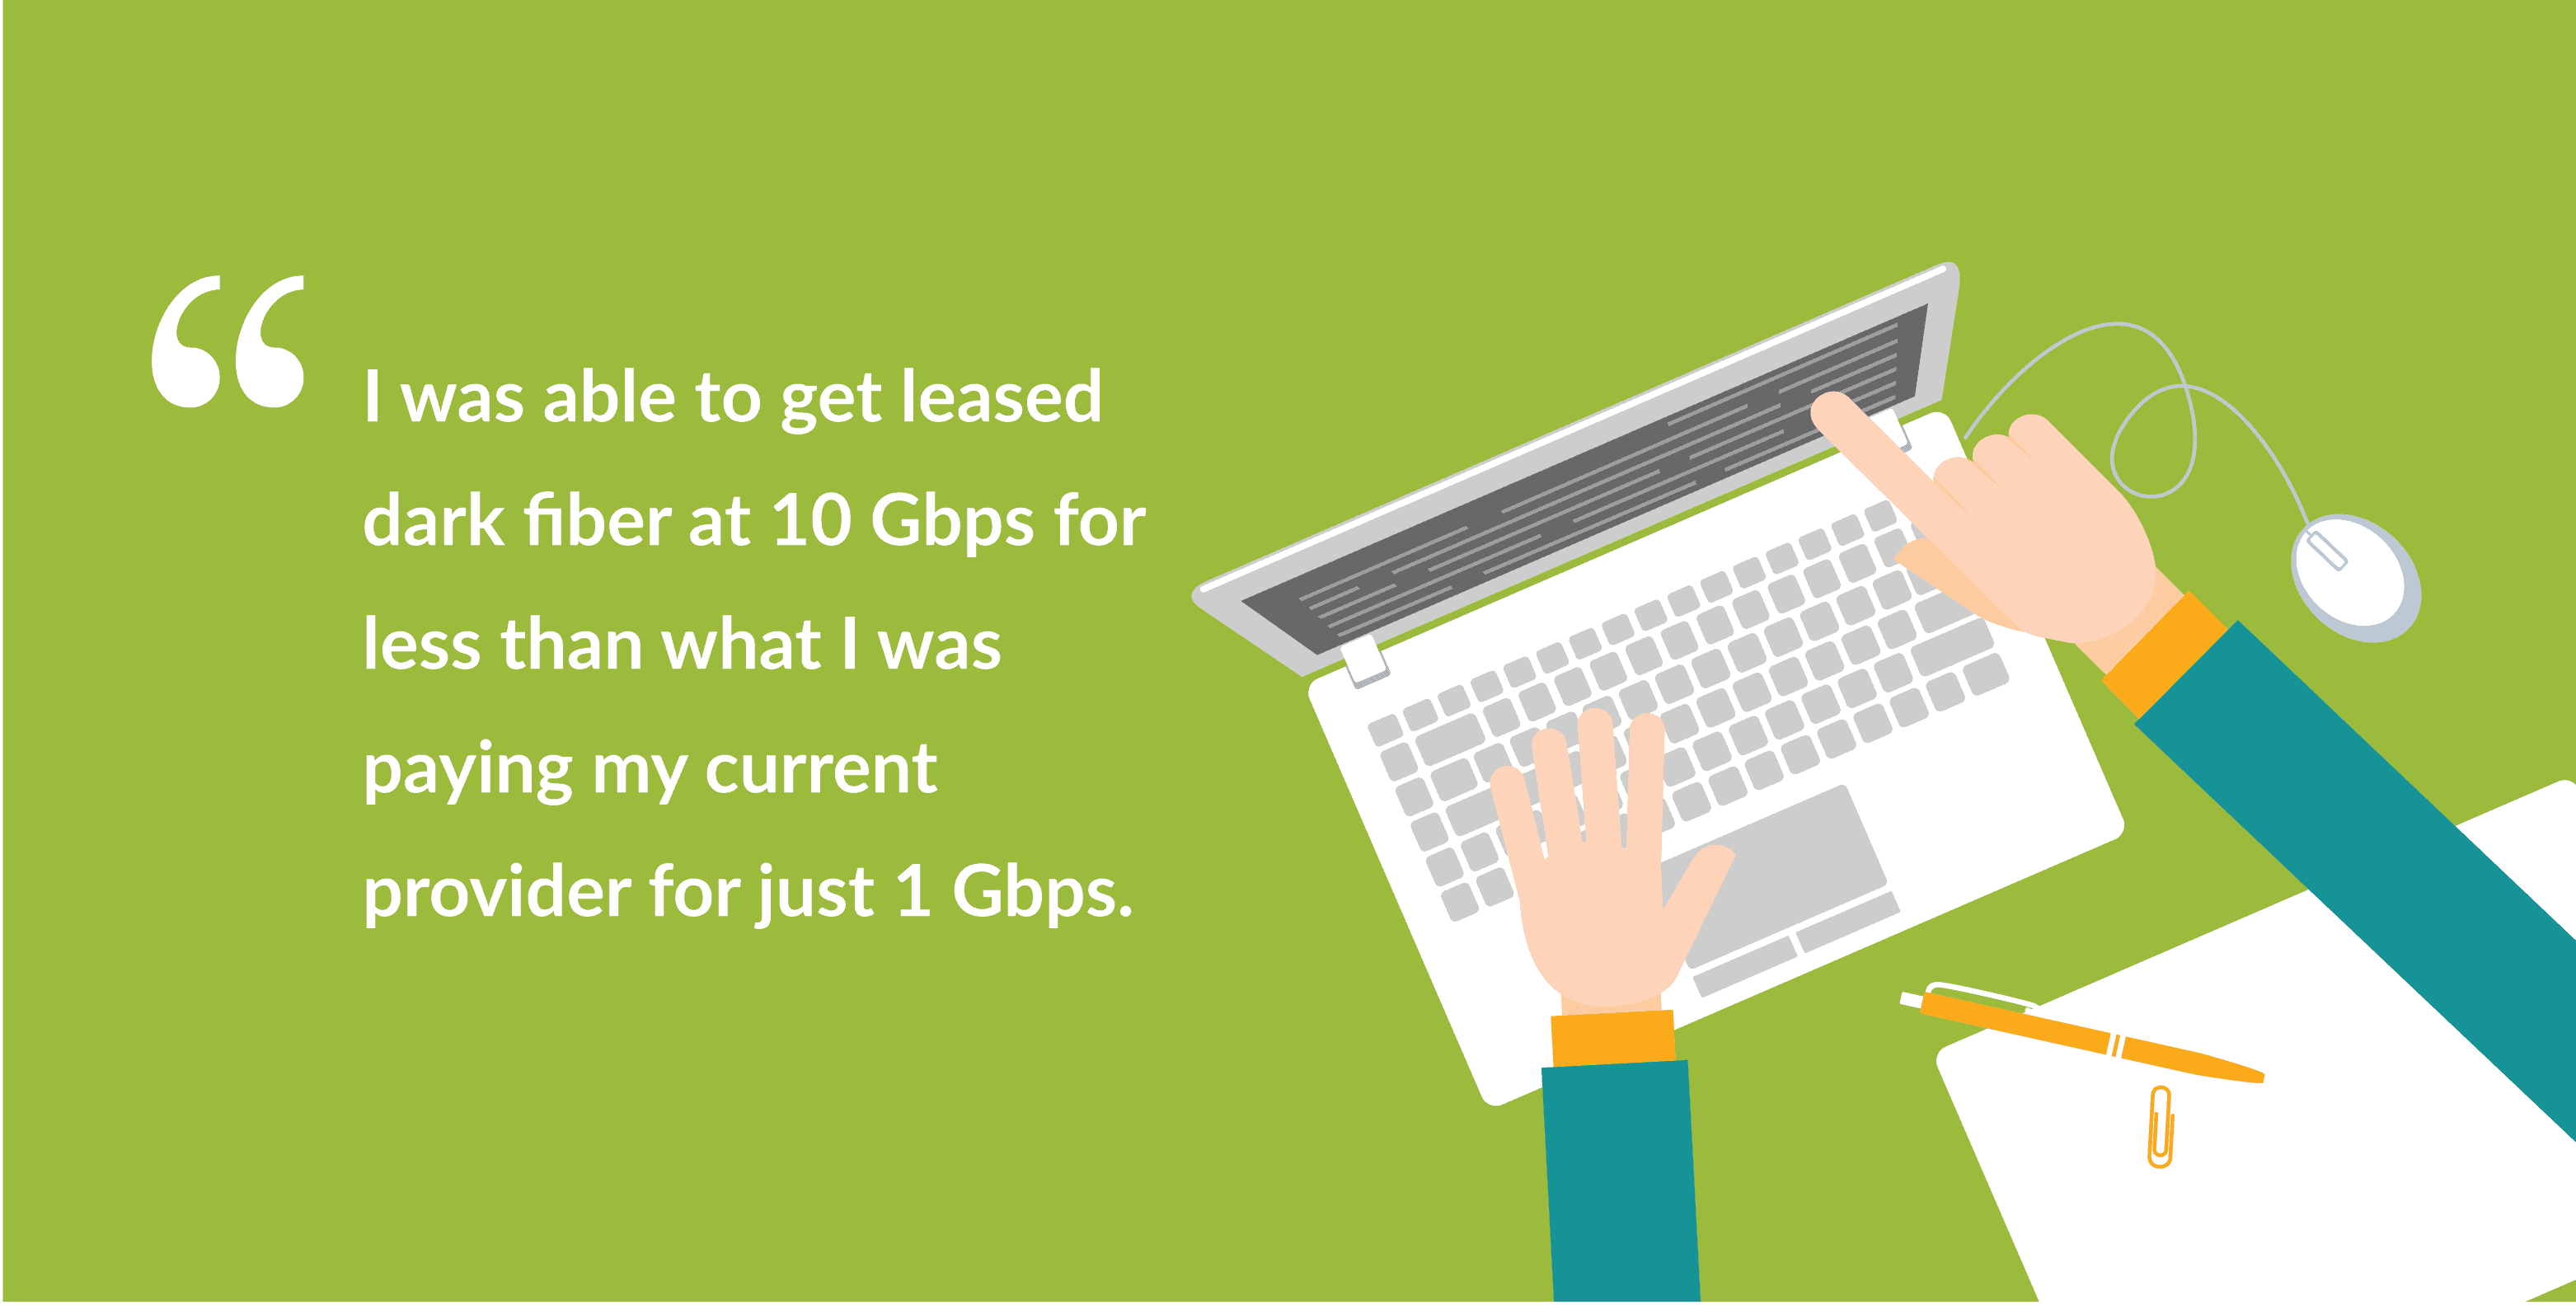 Graphic of a computer and hands pointing to the screen. Quote that says, "I was able to get leased dark fiber at 10 Gbps for less than what I was paying my current provider for just 1 Gbps."